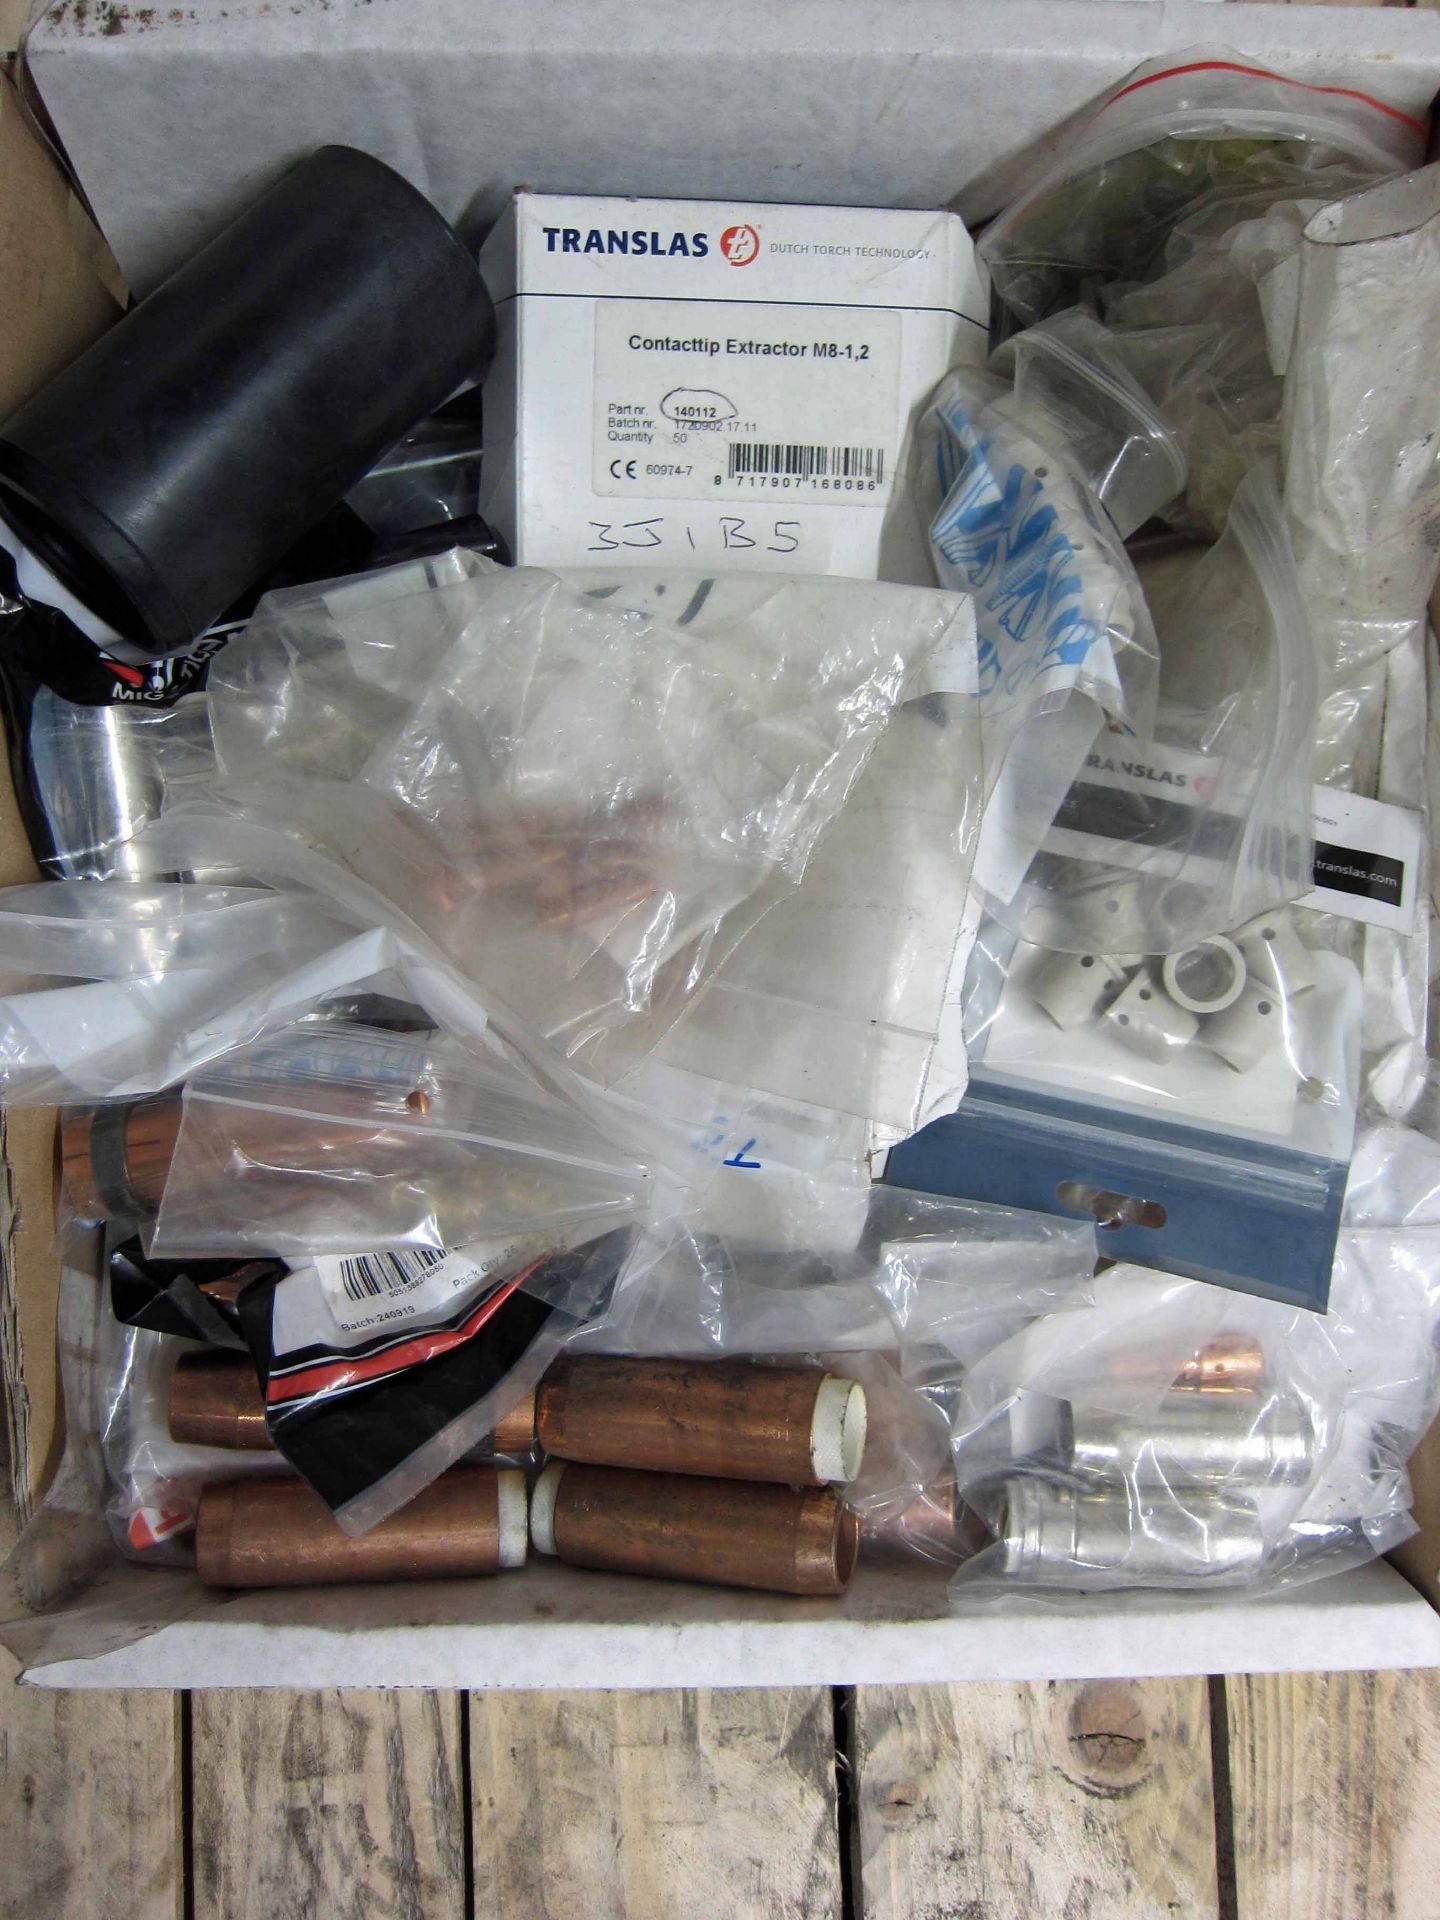 A Quantity of Welding/Gas Torch Welding Tips, Diffusers, etc. (As Lotted) - Image 2 of 2